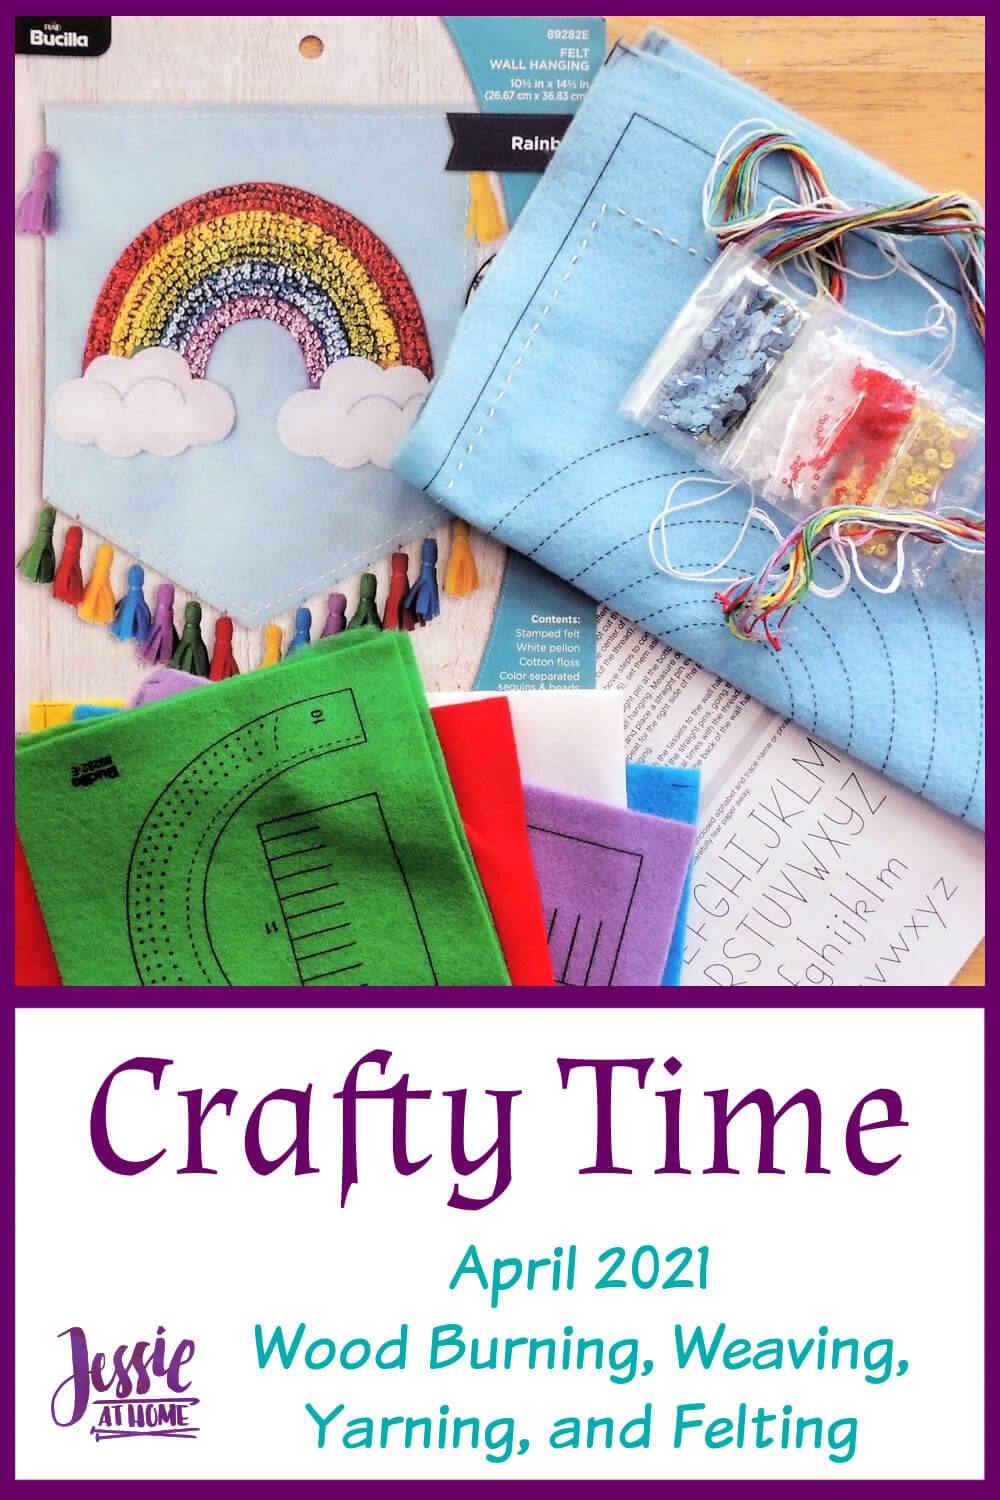 Wood Burning, Weaving, Yarning, and Felting - April 2021 Crafty Time with Jessie